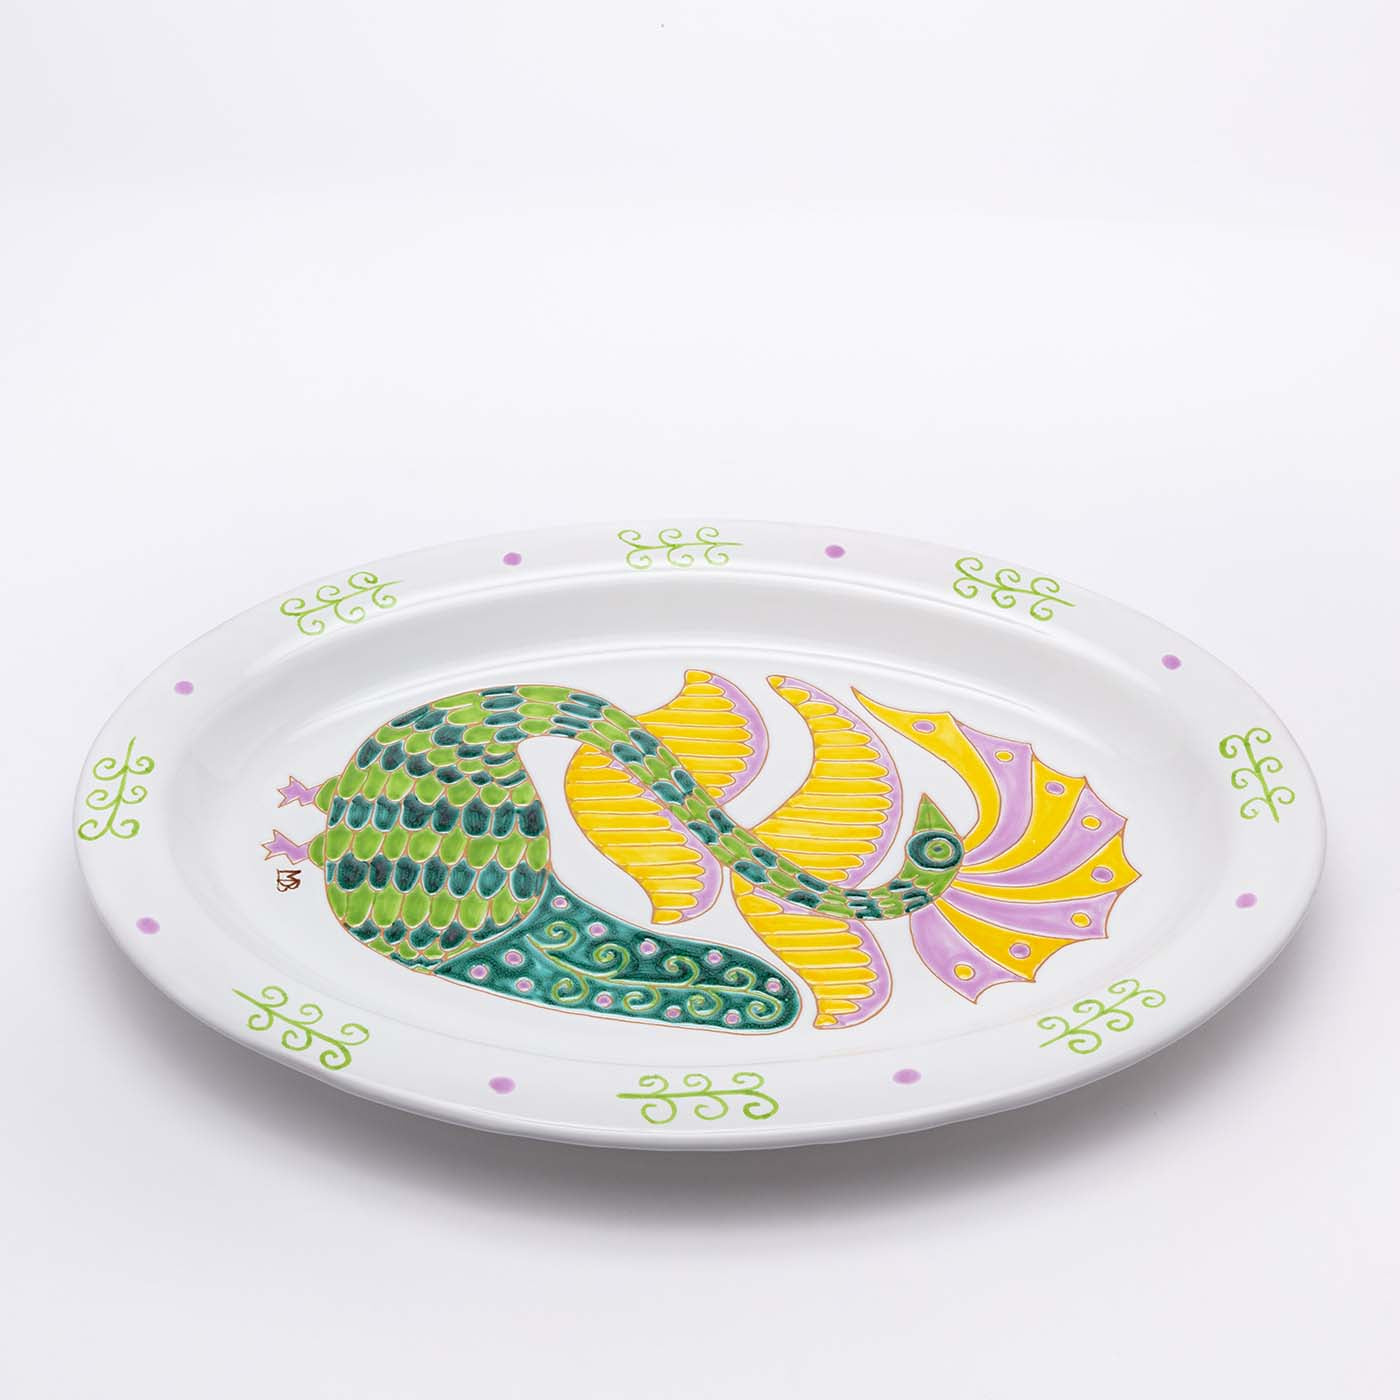 Le Fenici Oval Green and Yellow Tray - Alternative view 2